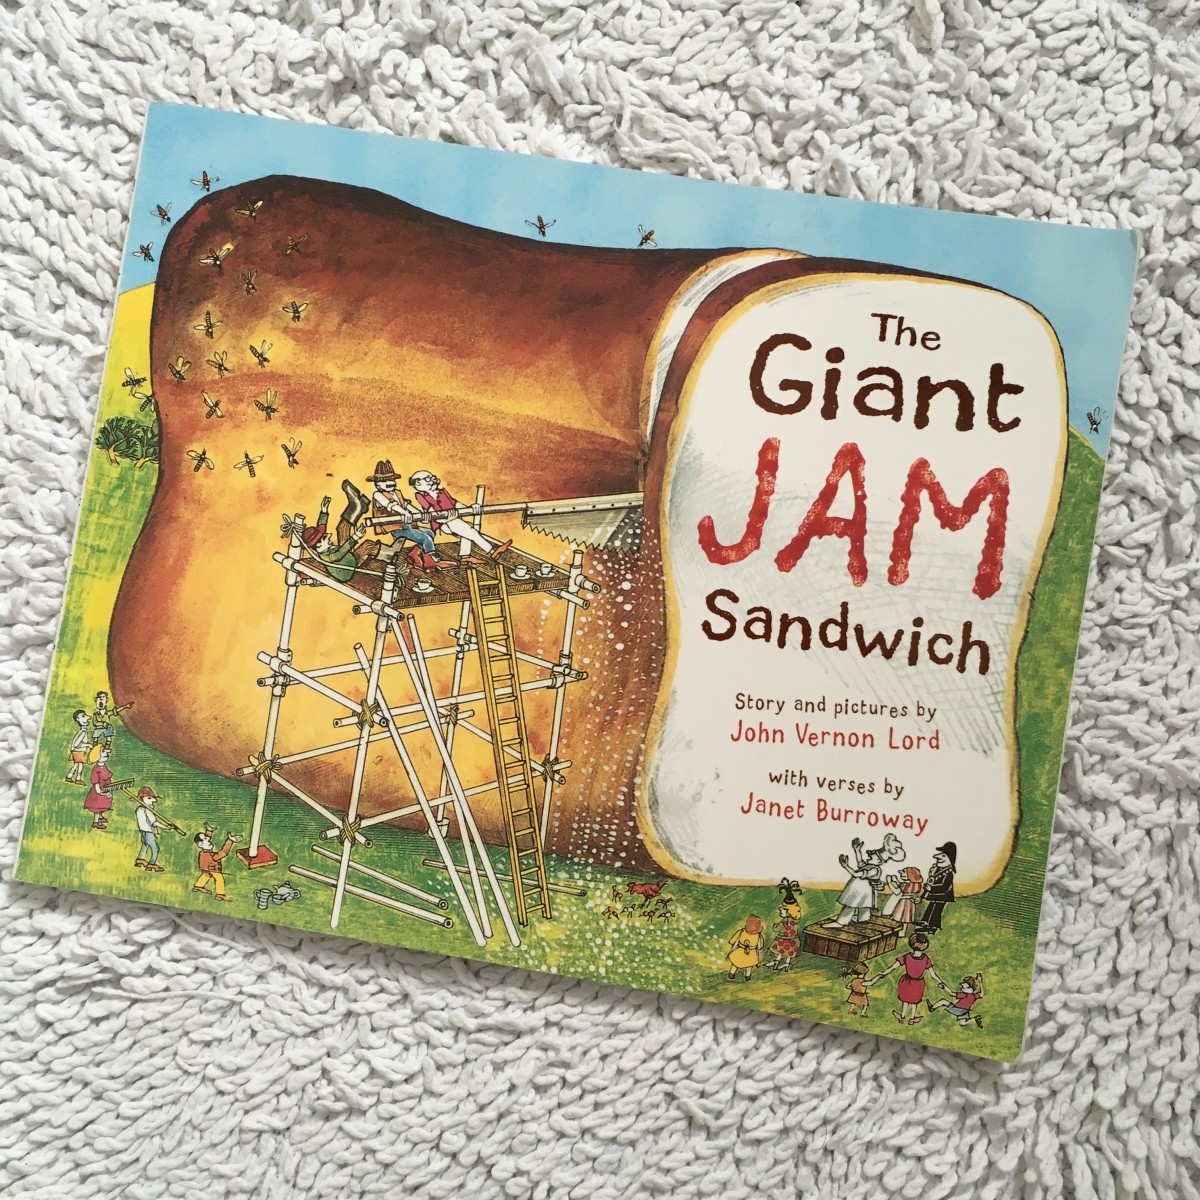 Great books for three year olds by Harrogate Mama, Giant Jam Sandwich